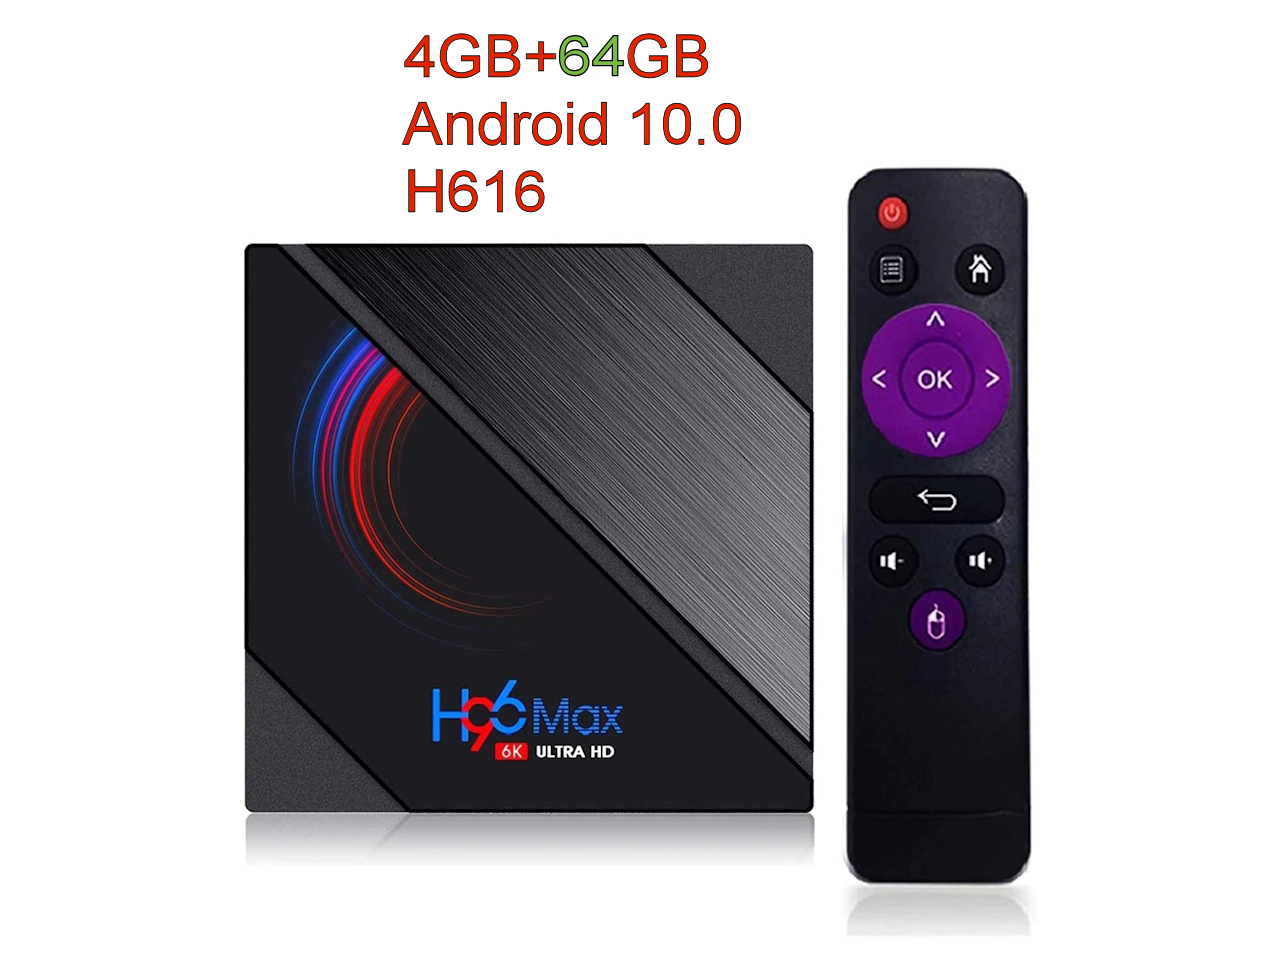 Android TV H96 maxH 64